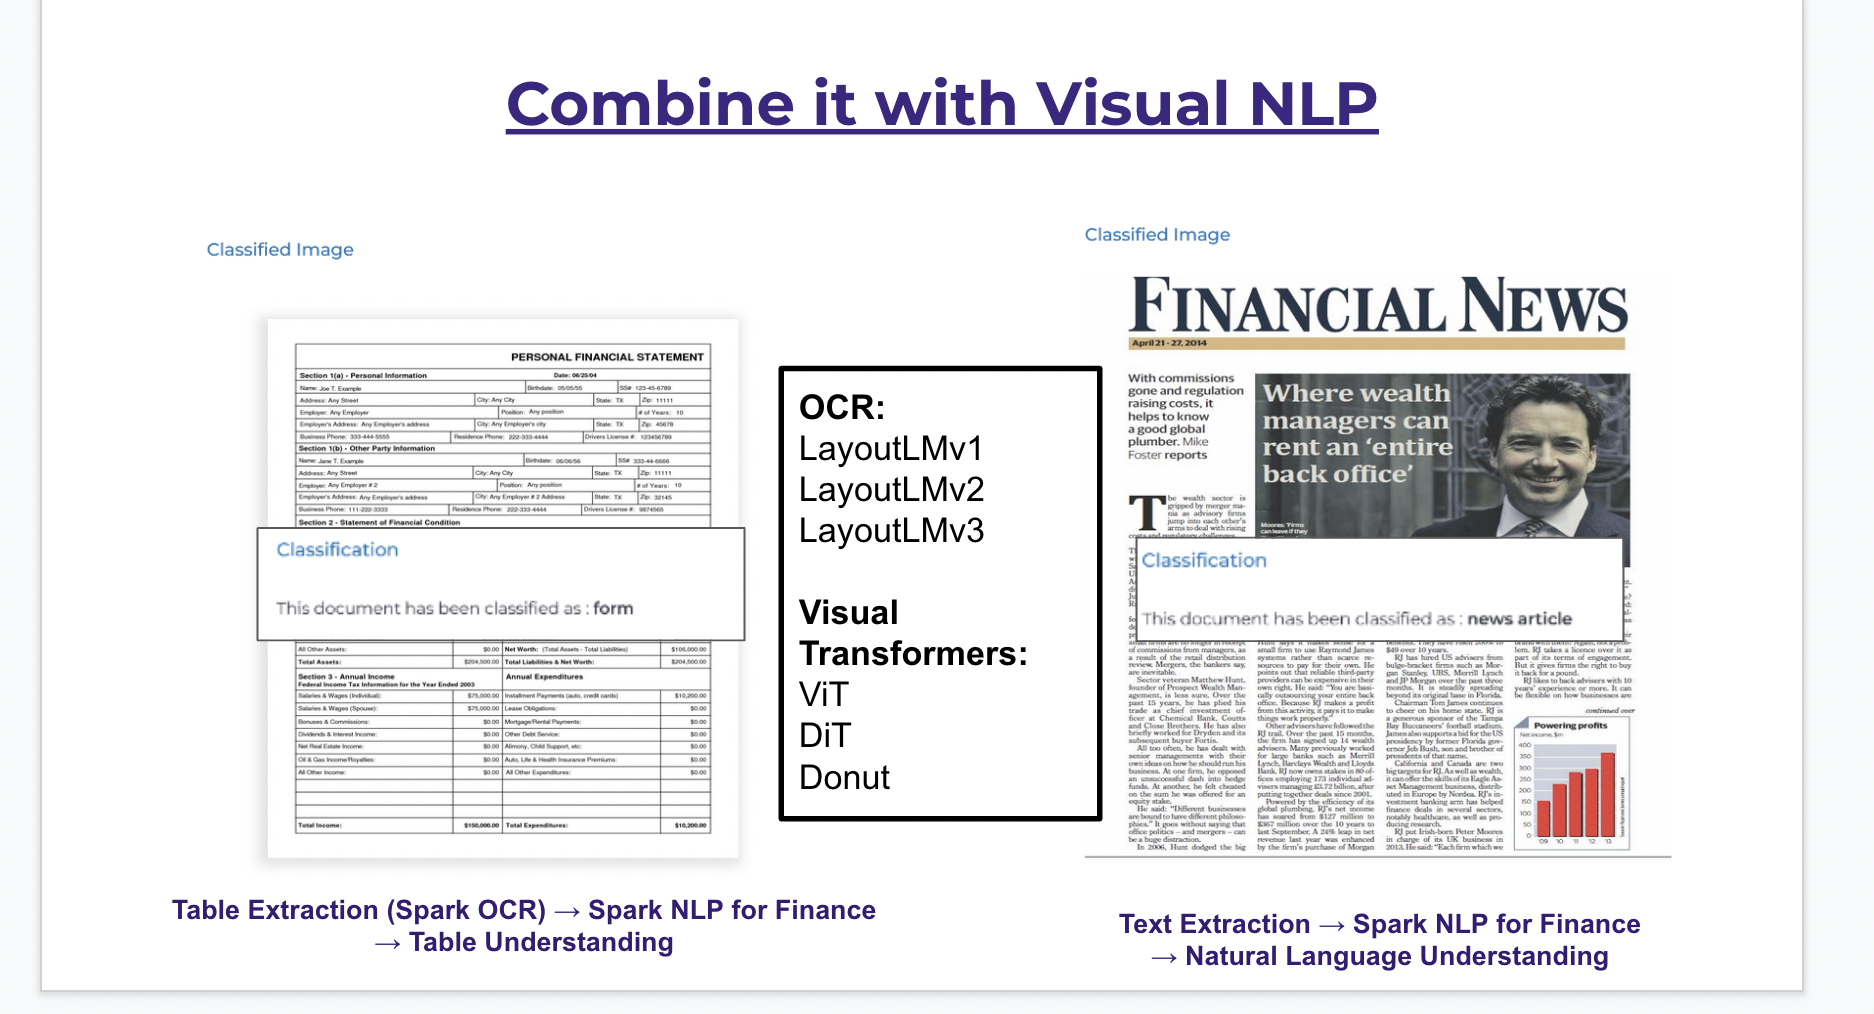 Finance NLP with Visual NLP extracts tables, images, text from document and classifies text.